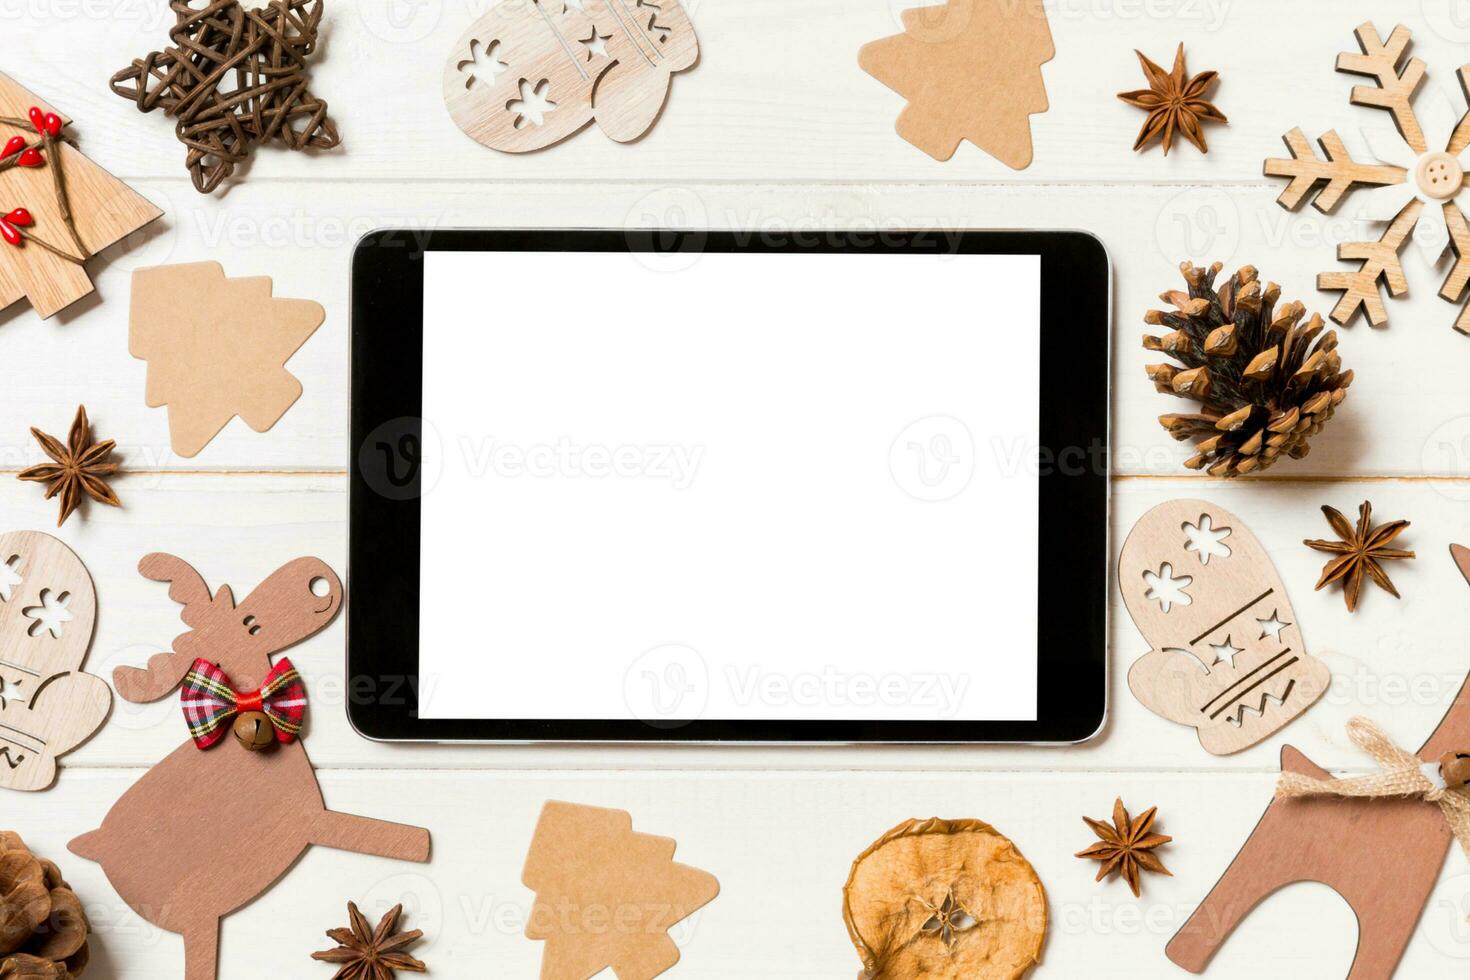 Top view of tablet on holiday wooden background. New Year decorations and toys. Christmas concept photo